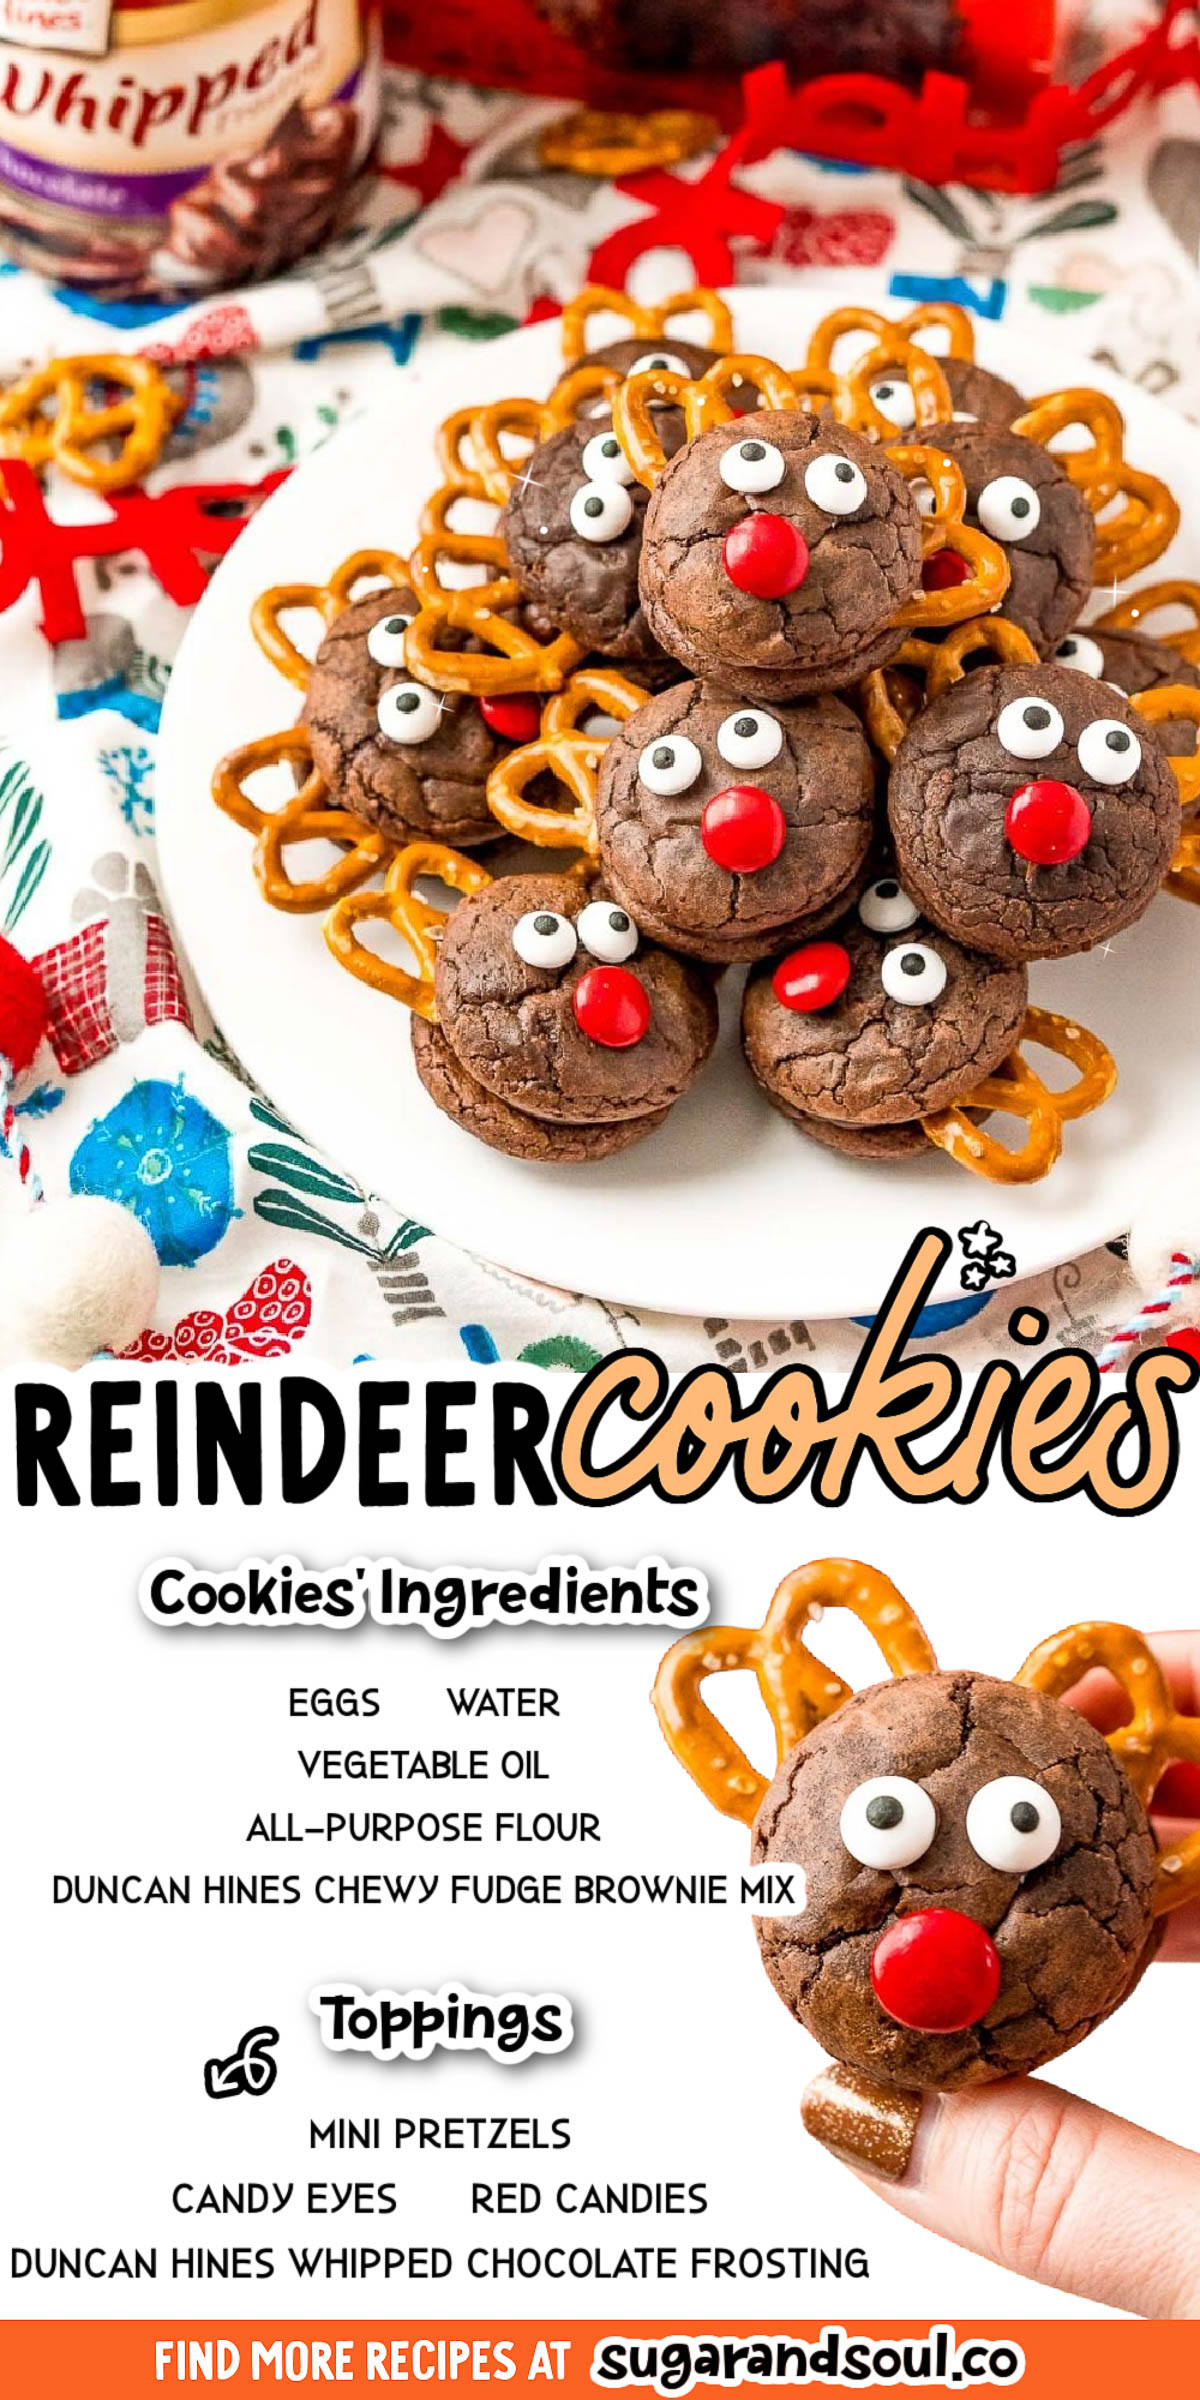 Reindeer Cookies are a festive recipe made with brownie sandwich cookies, frosting, pretzels, chocolate candies, and candy eyes! The best part about these treats is the whole family can help with the decorating! via @sugarandsoulco